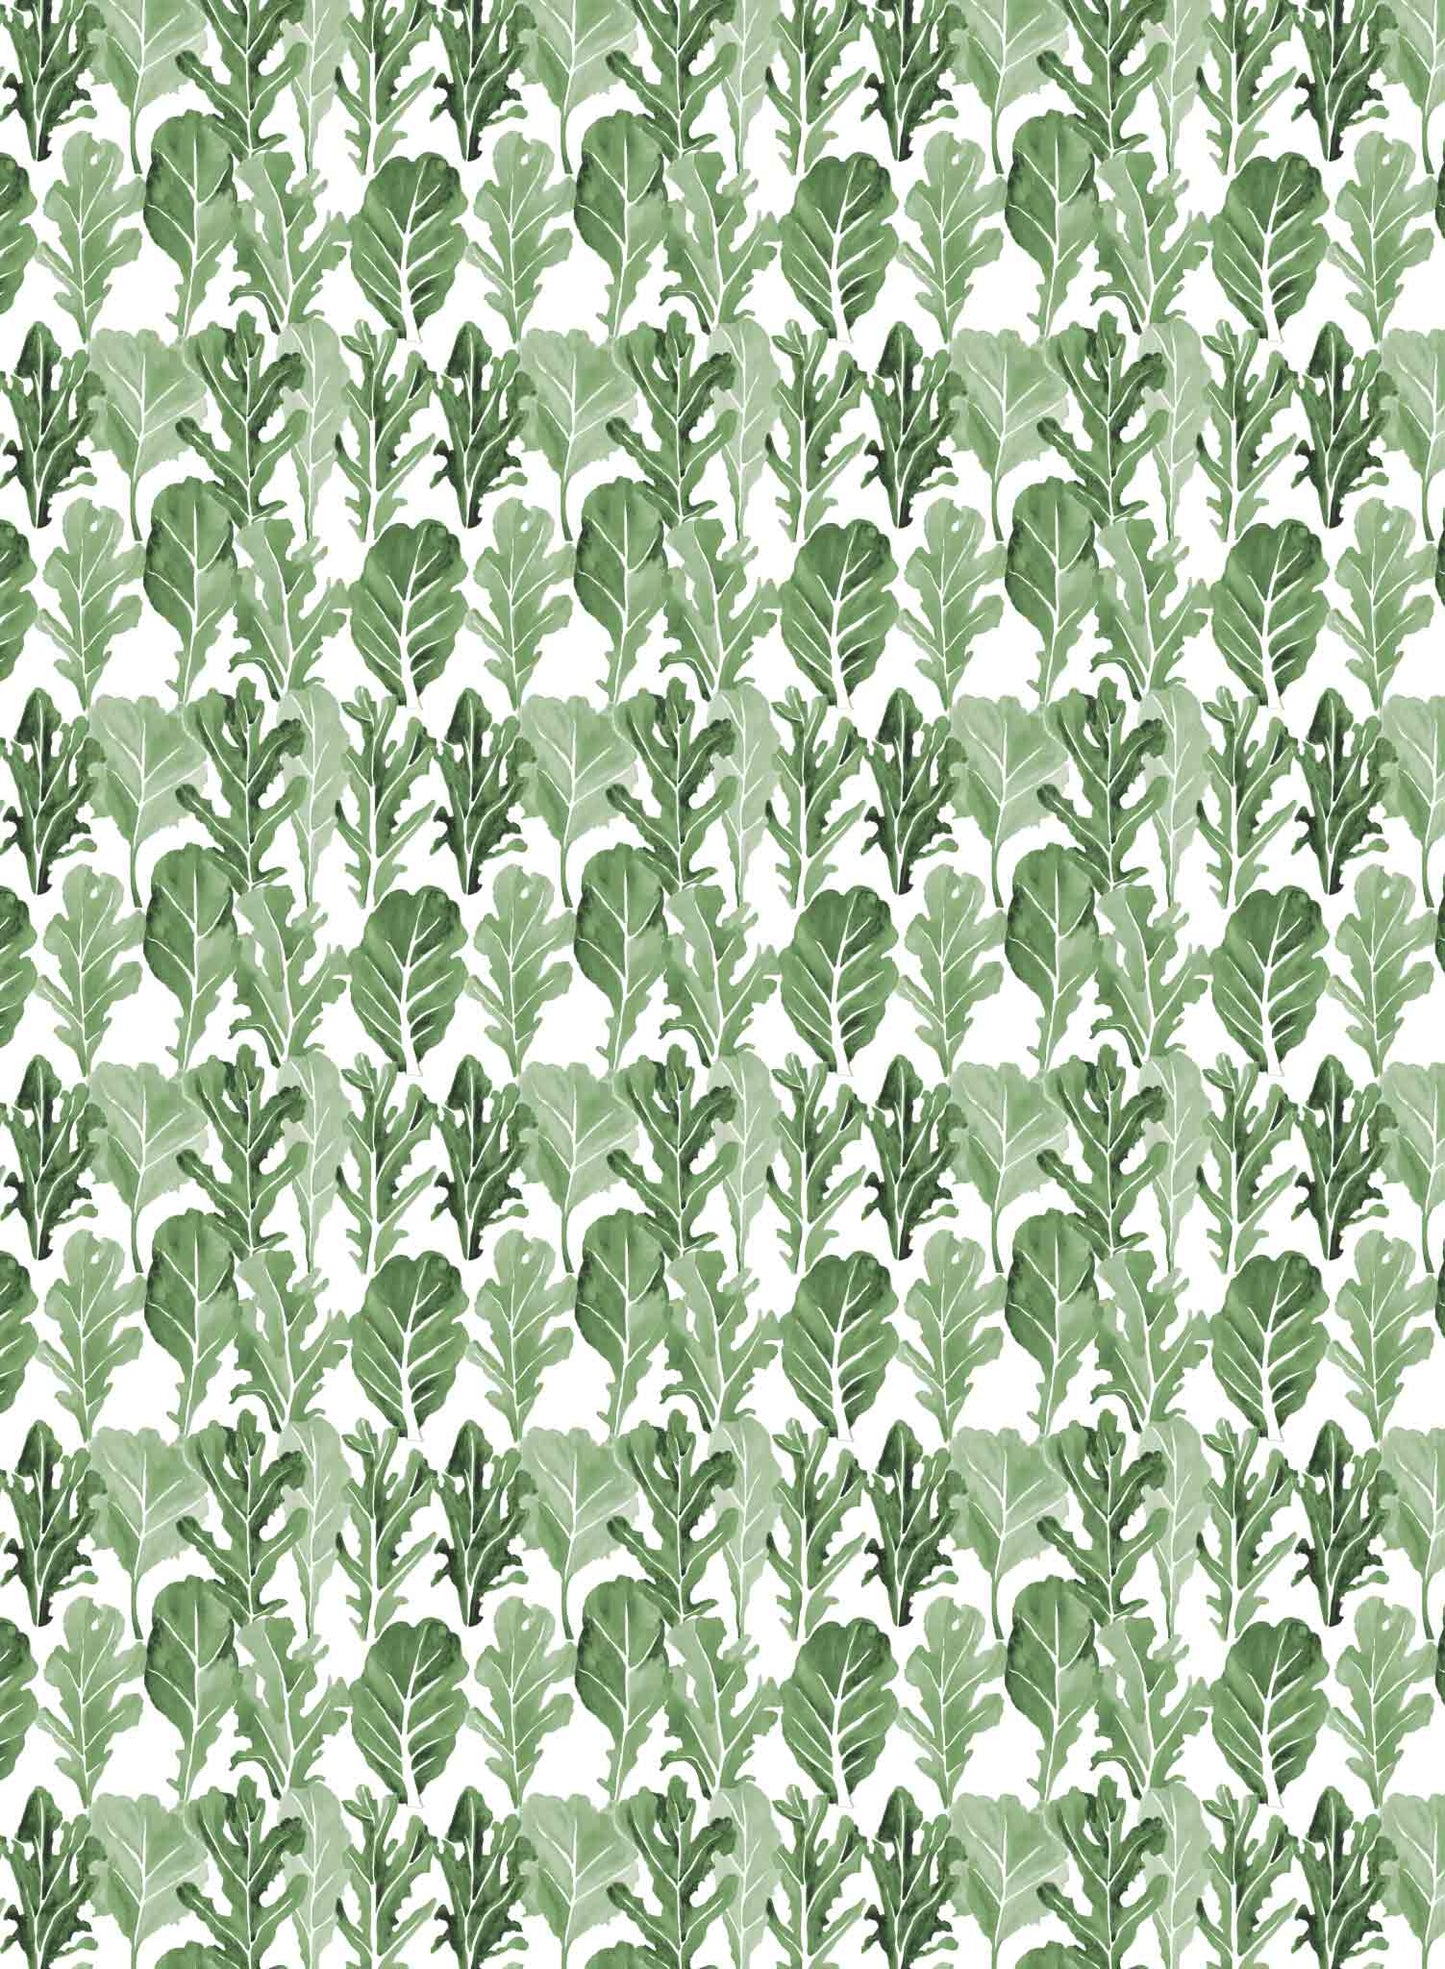 Salad Season is a minimalist wallpaper by Opposite Wall of a variety of lettuce leaves.